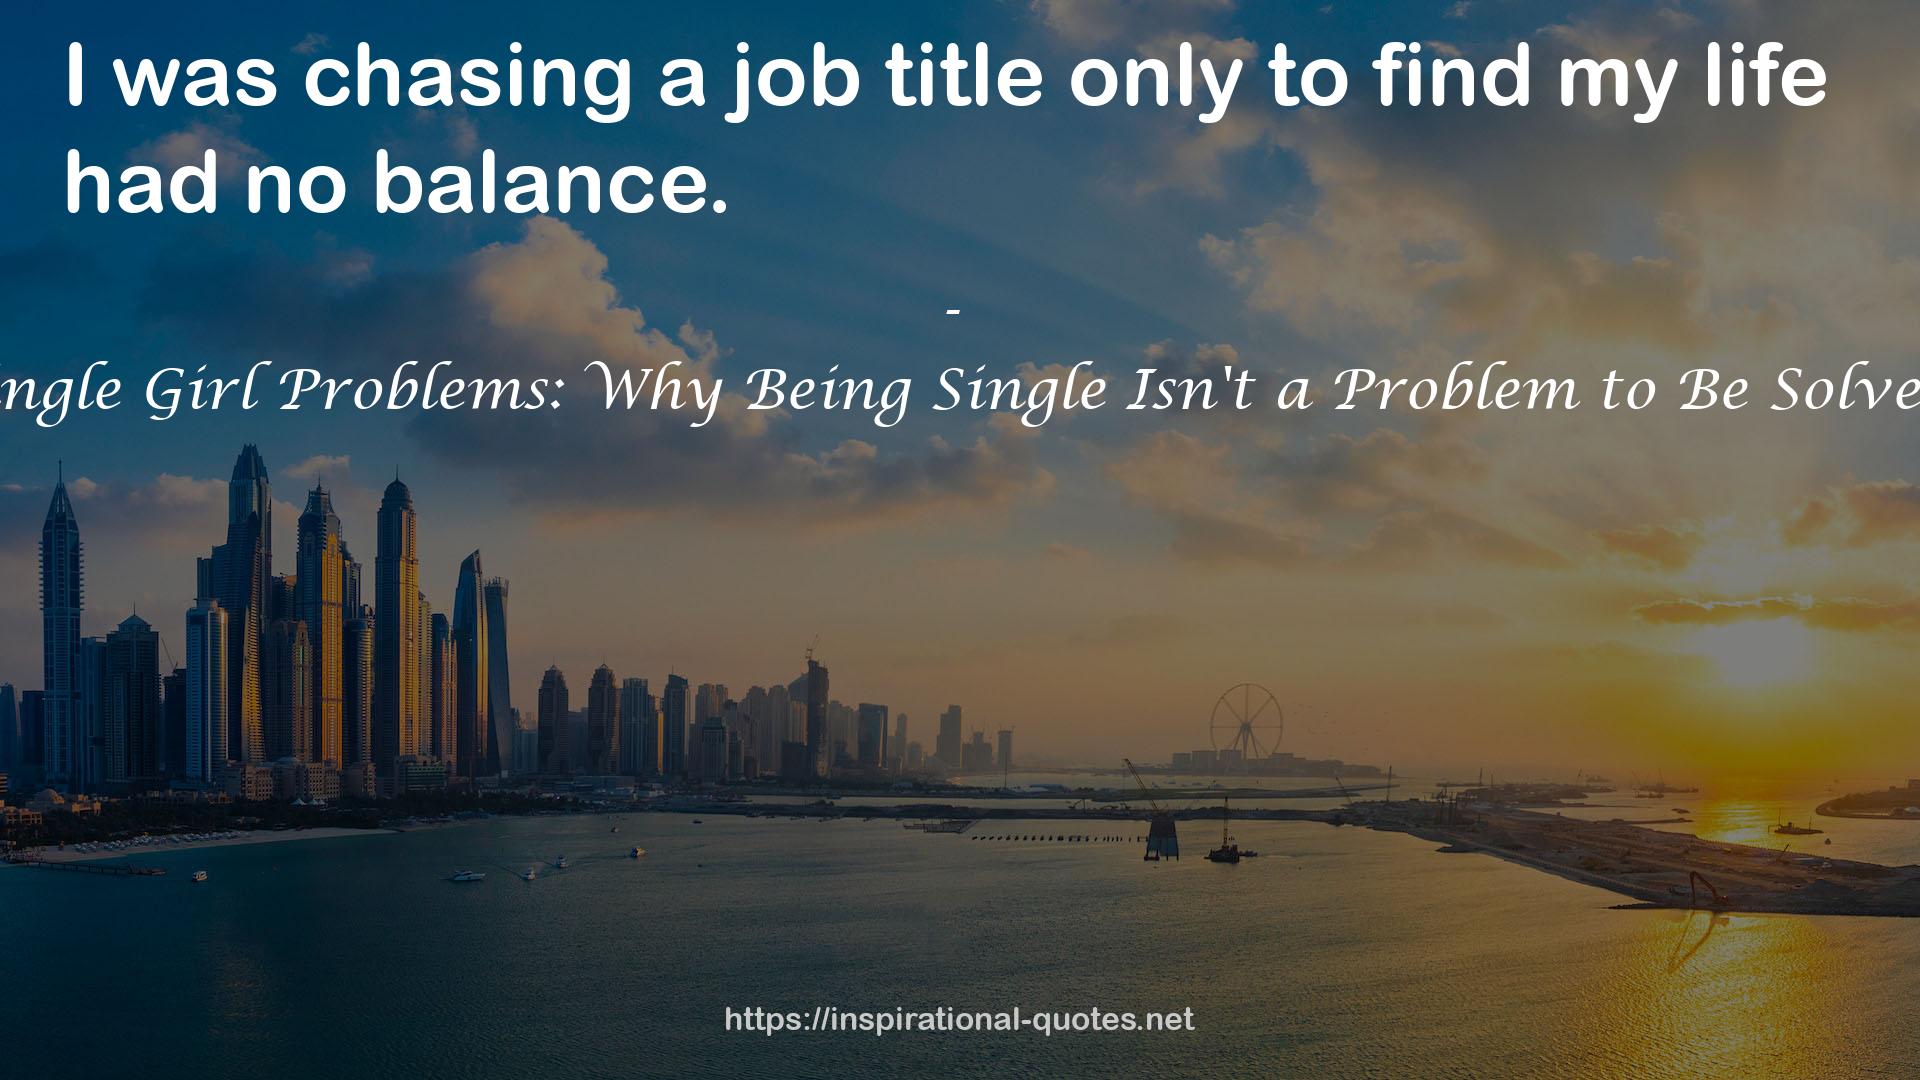 Single Girl Problems: Why Being Single Isn't a Problem to Be Solved QUOTES